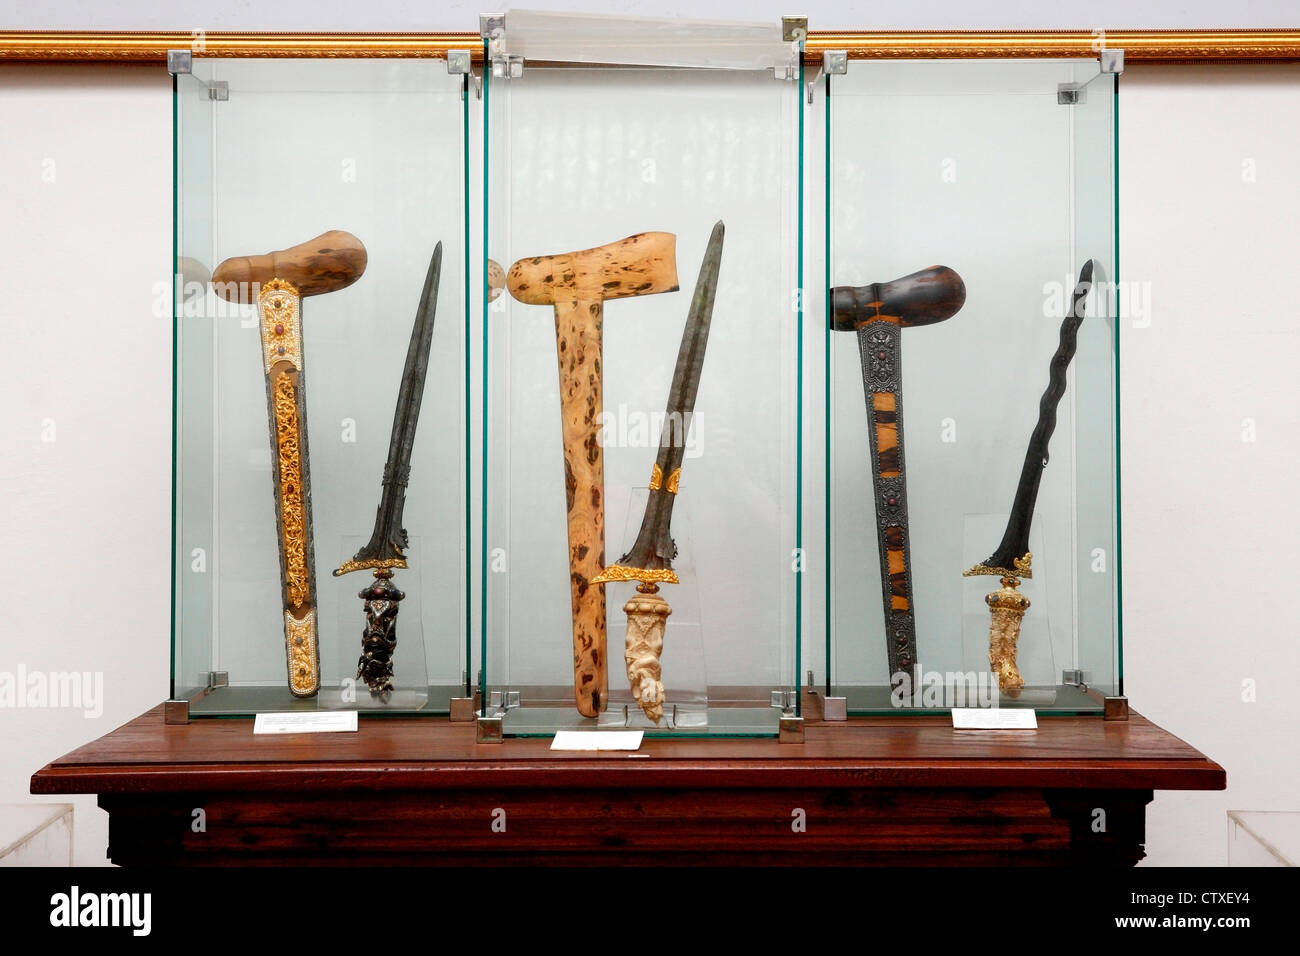 A collection of Keris, or Kris Daggers, at the Neka Art Museum, Ubud, Bali, Indonesia. Stock Photo